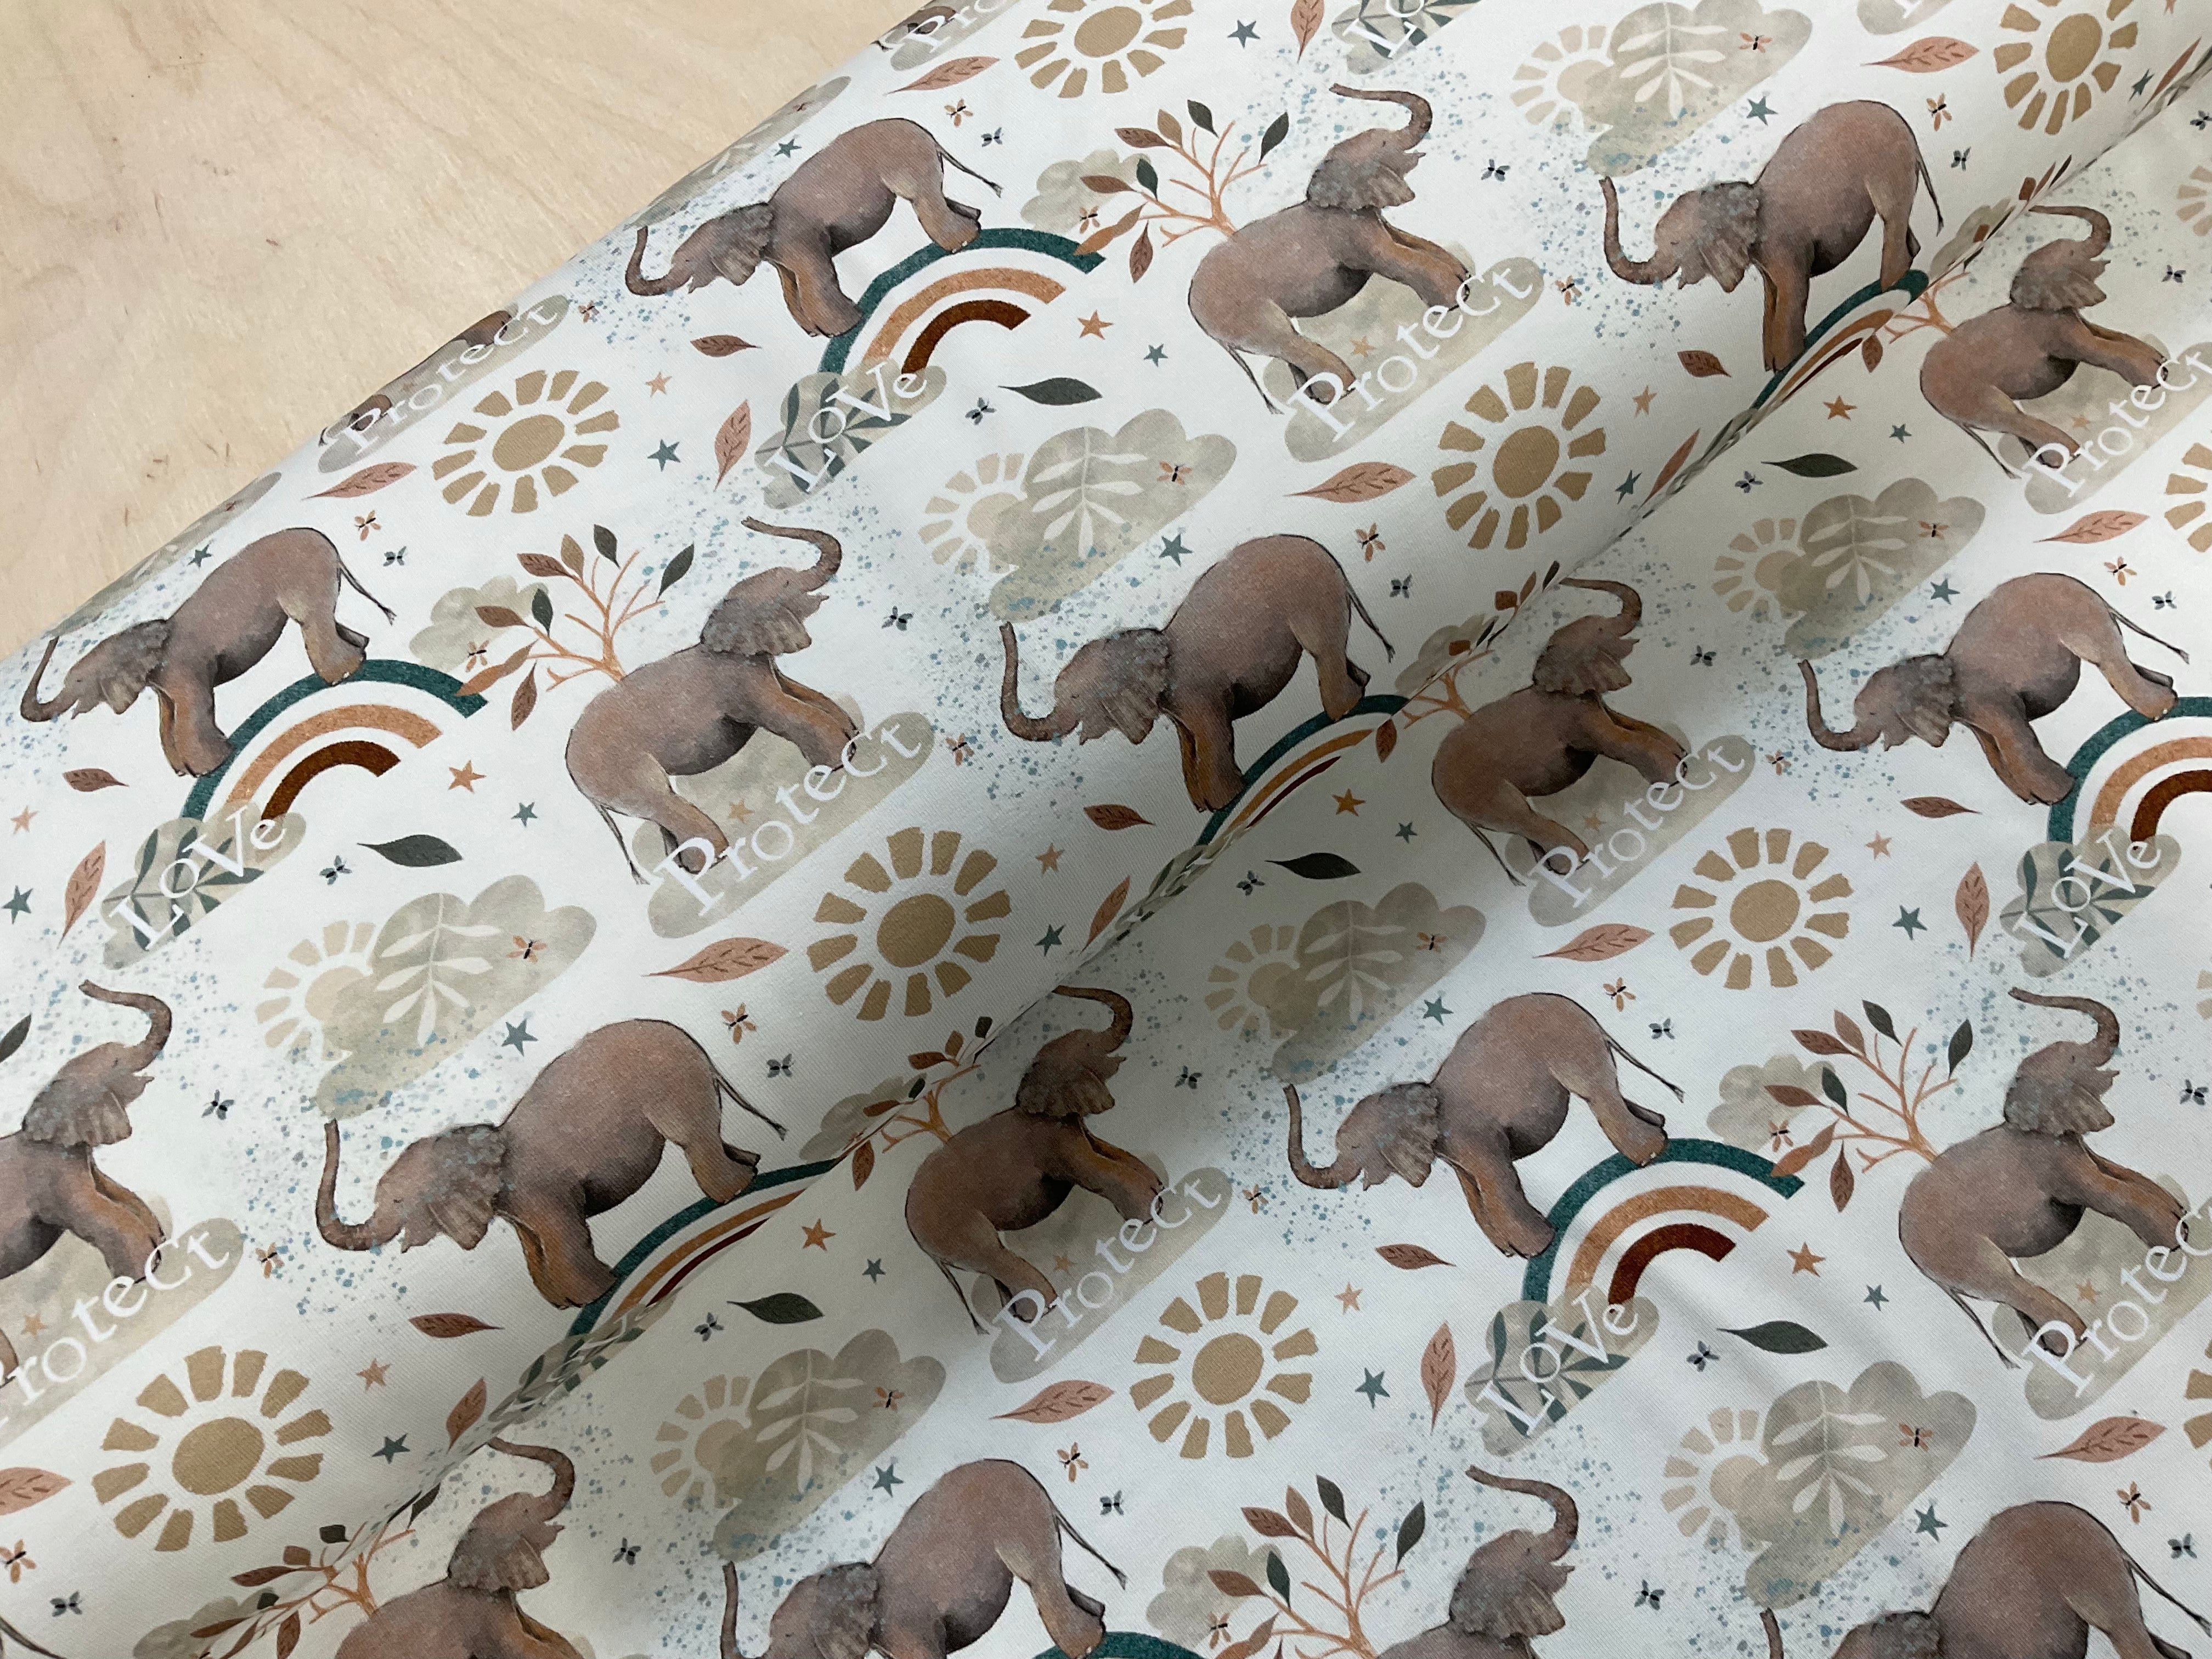 ORGANIC Protect and Love Elelphants Cotton Jersey Fabric